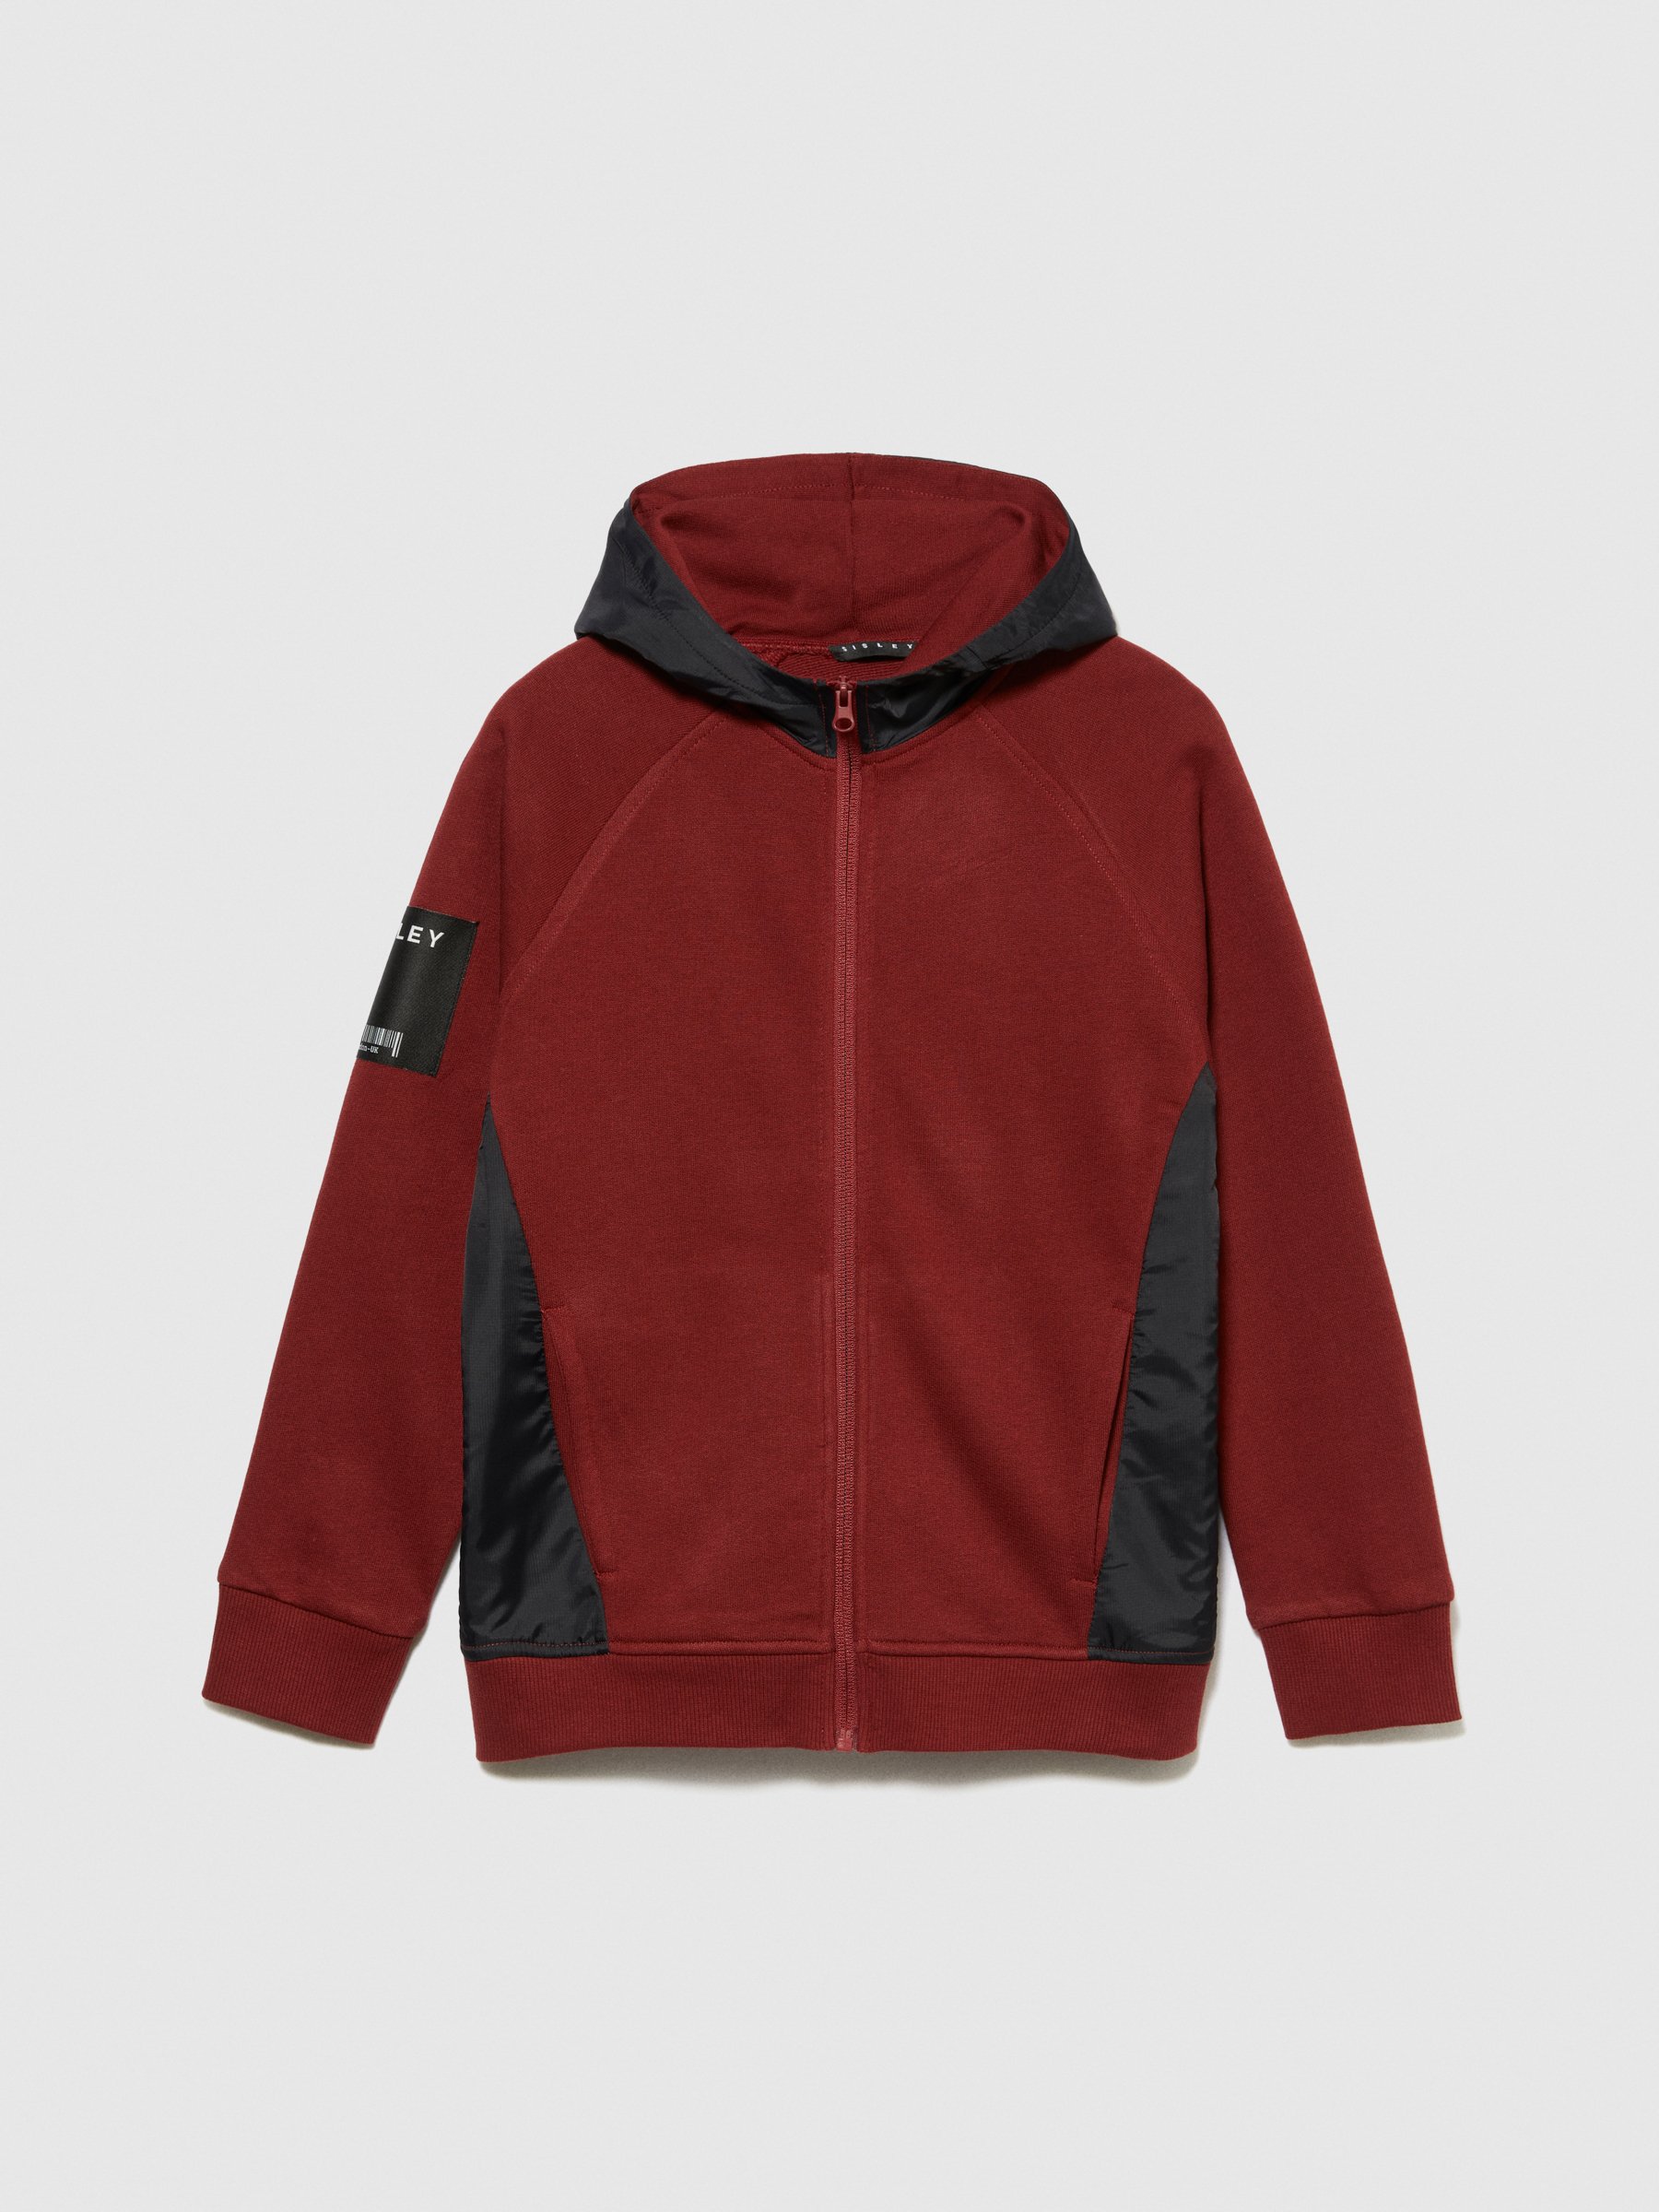 Sisley Young - Mixed Material Hoodie, Man, Burgundy, Size: XL